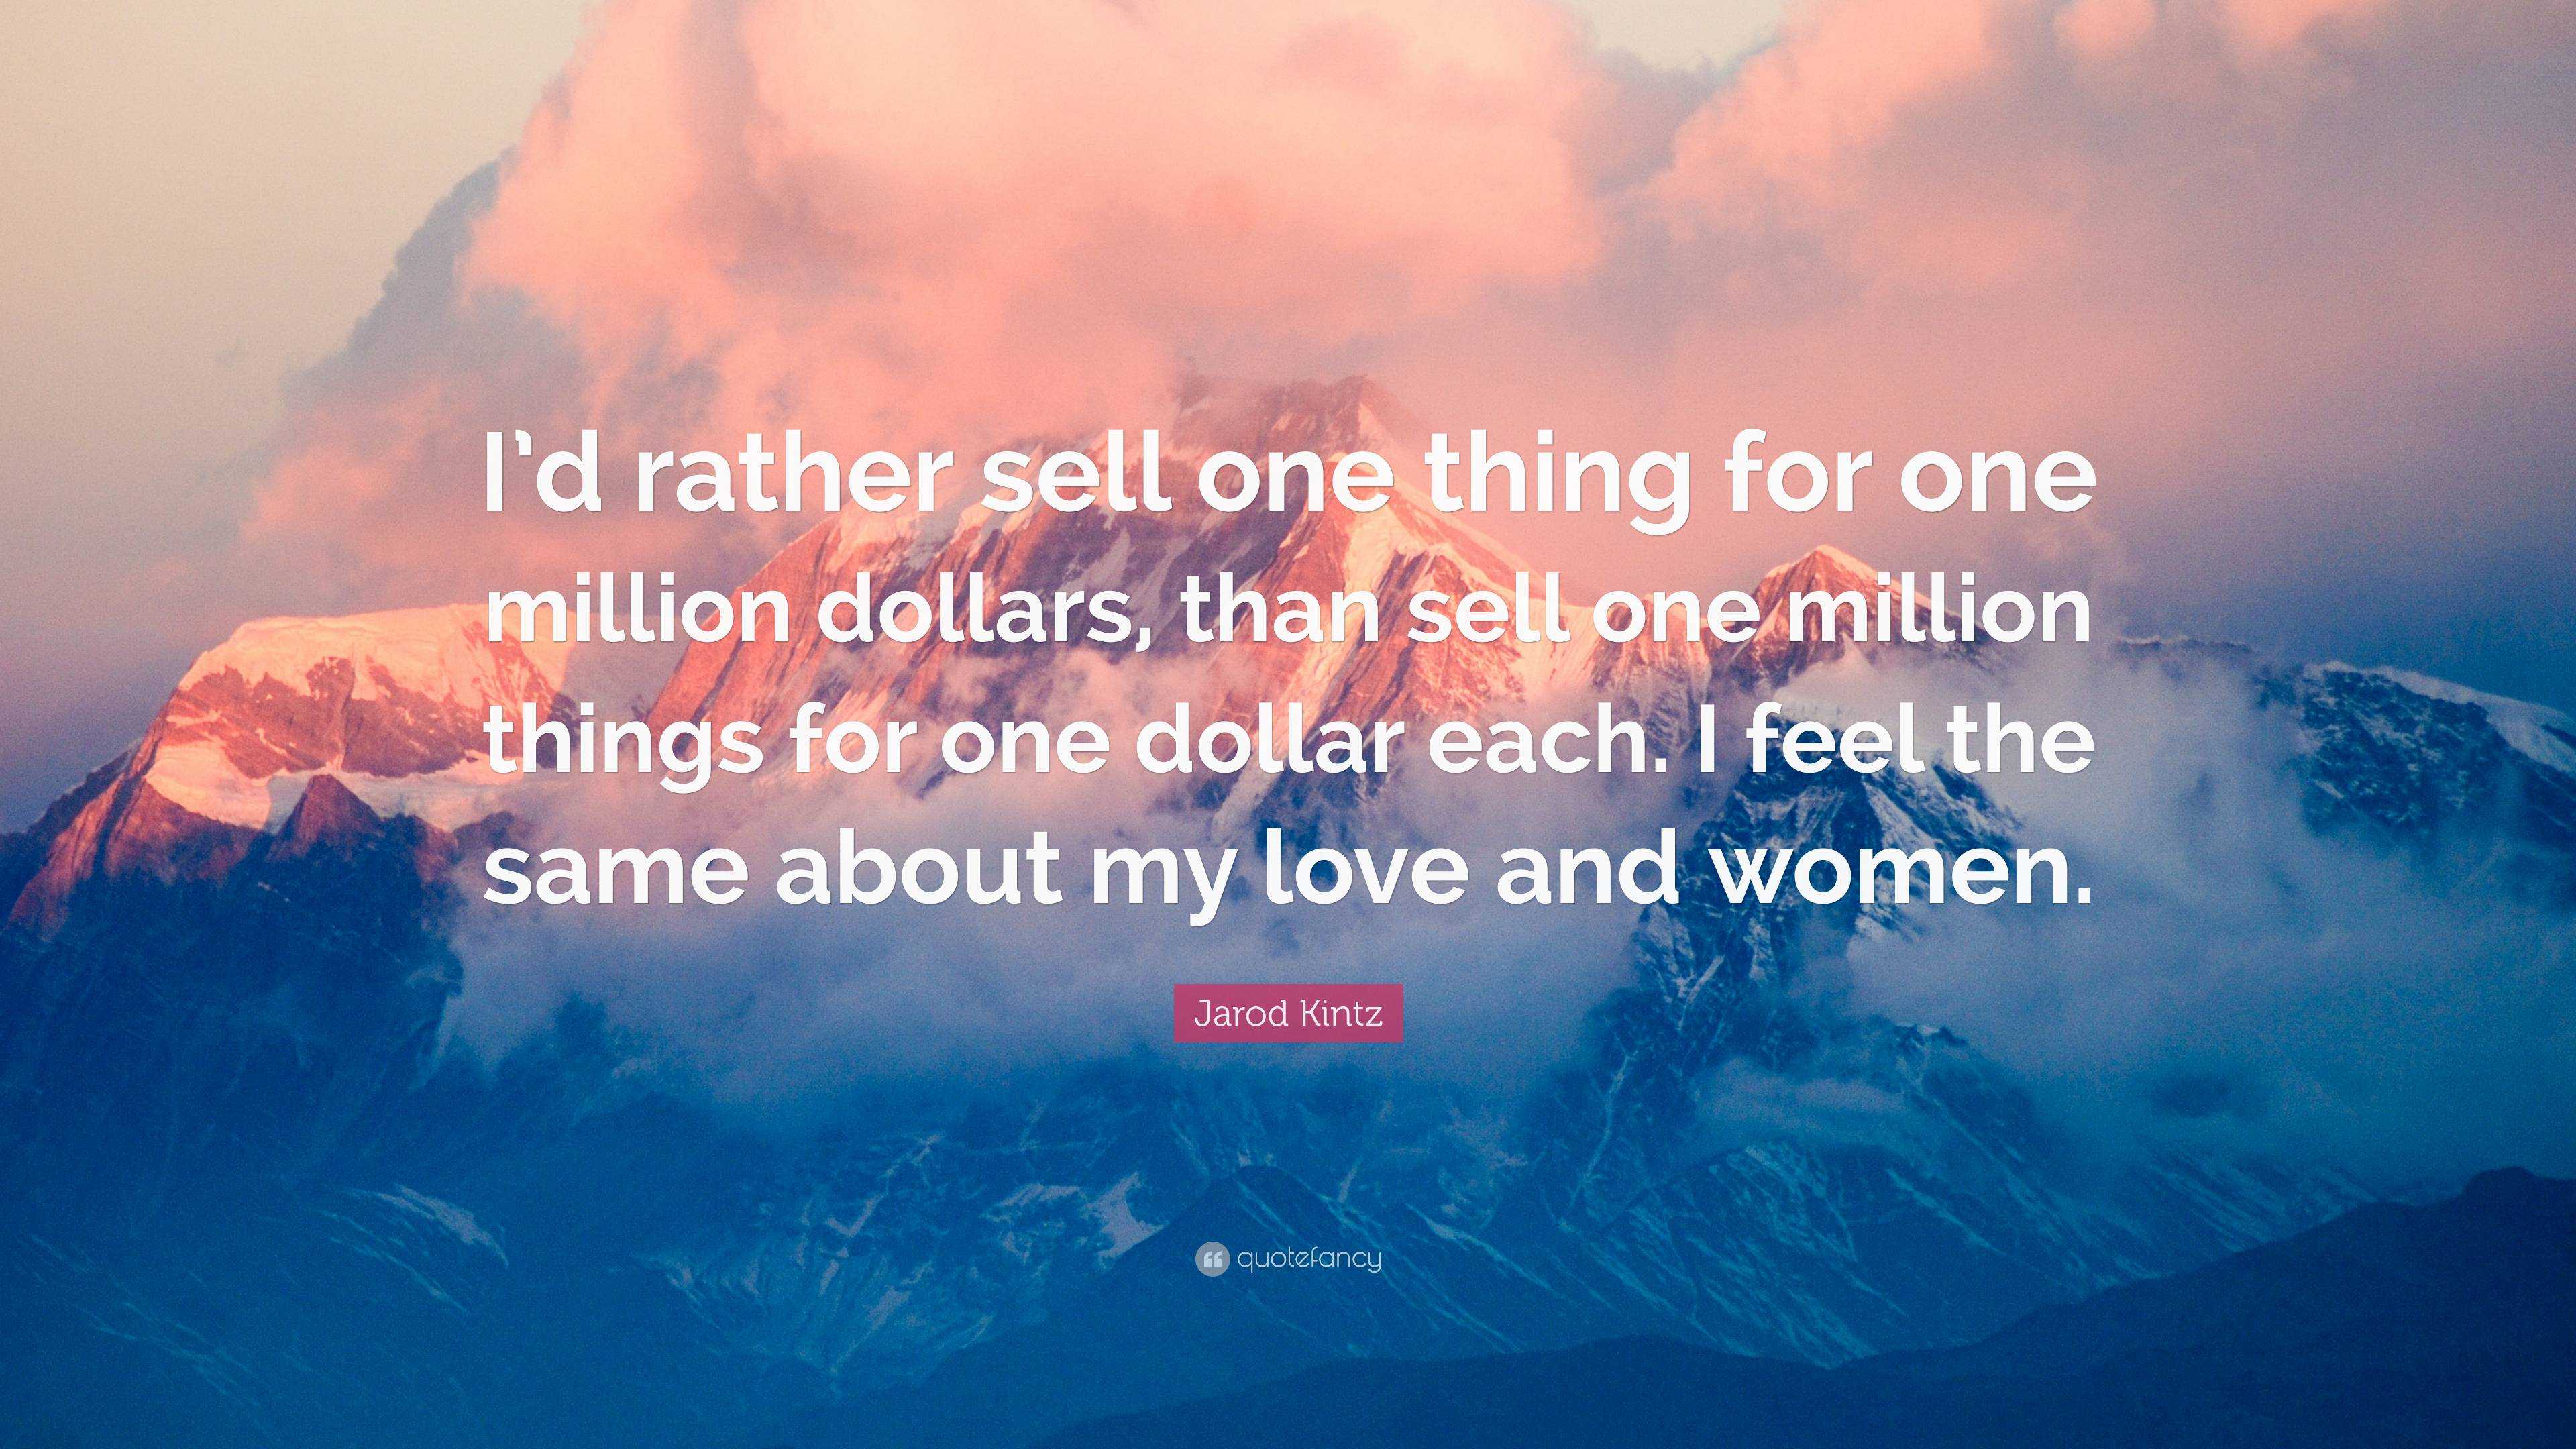 https://quotefancy.com/media/wallpaper/3840x2160/6387957-Jarod-Kintz-Quote-I-d-rather-sell-one-thing-for-one-million.jpg